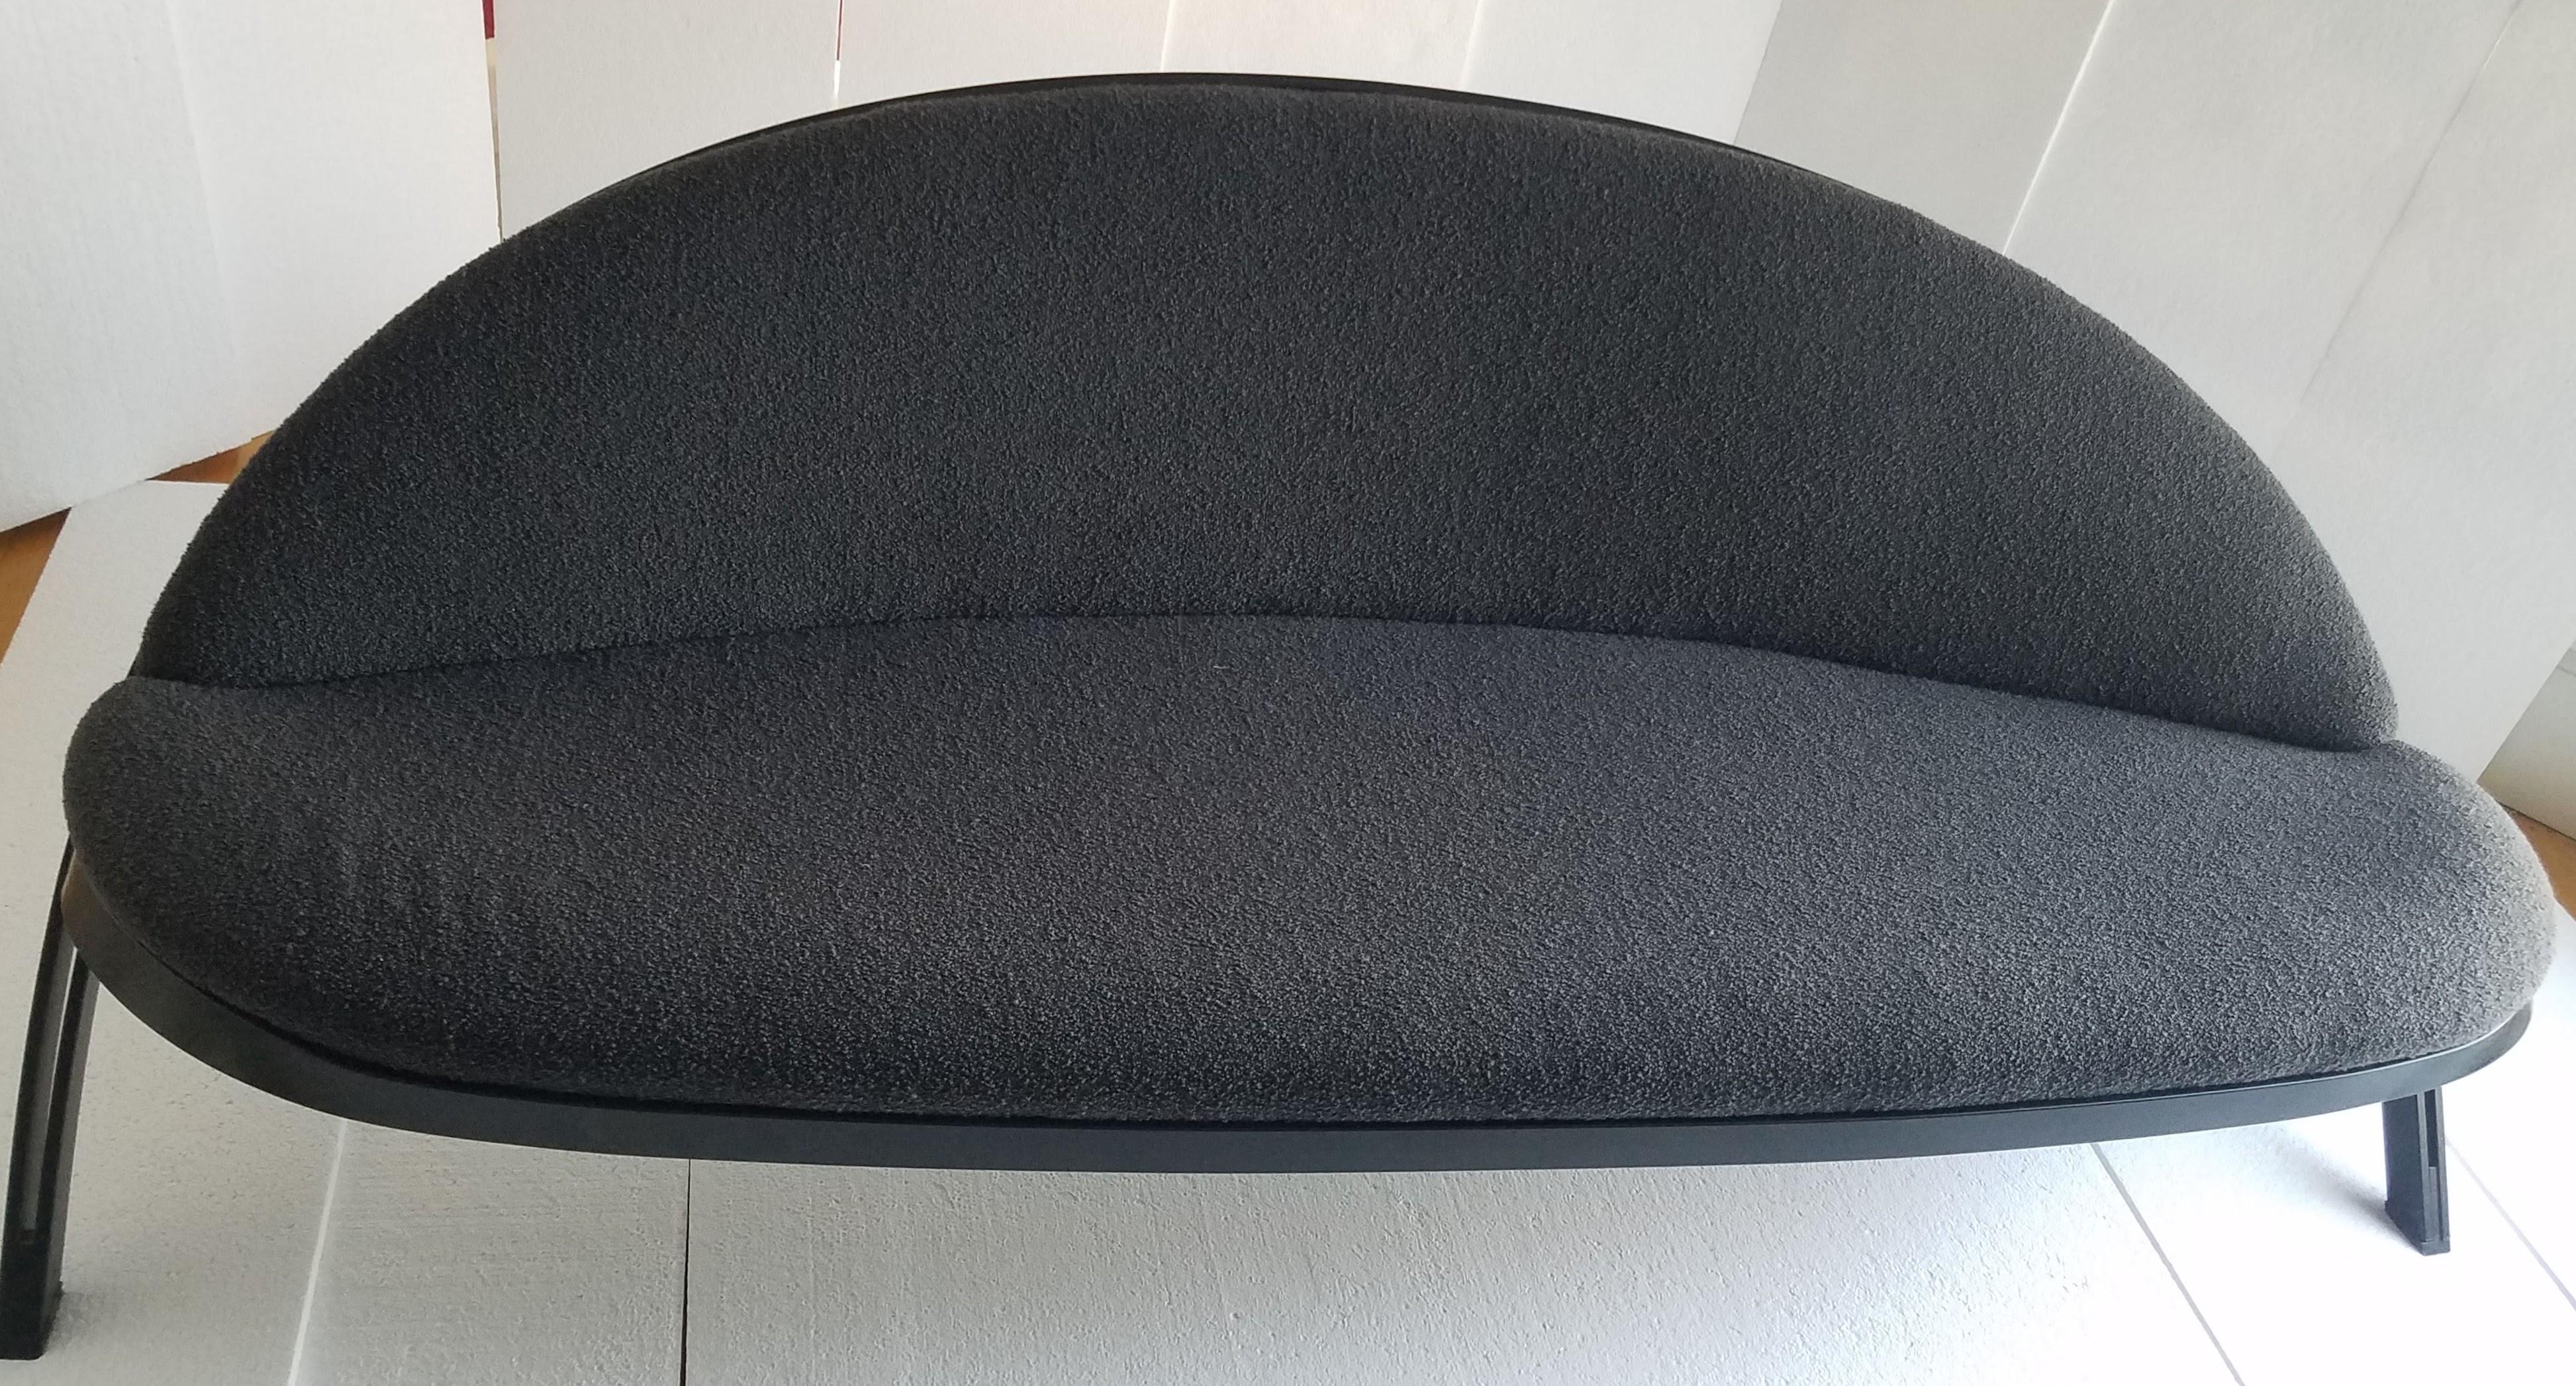 Saturn (Saturno) sofa by Gaston Rinaldi for Rima, Italy, 1958, upholstered in its original Italian charcoal grey boucle.
Rinaldi’s father founded RIMA in 1916 in Padova, Italy, in the north of Italy.
Rinaldi won the 1954 Compasso d’Oro for his